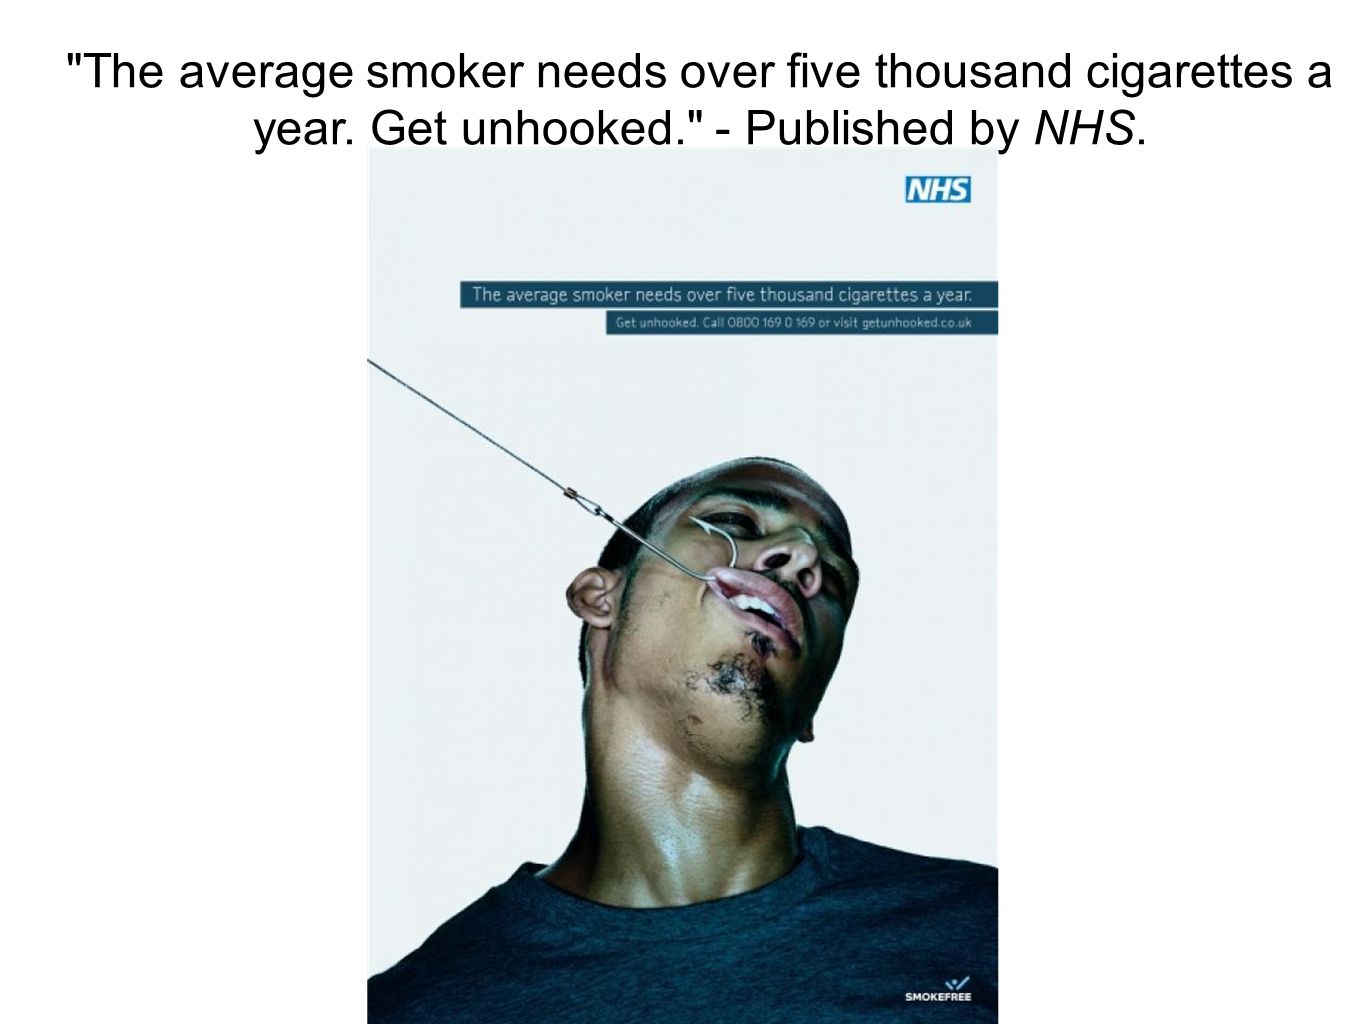 The average smoker needs over five thousand cigarettes a year